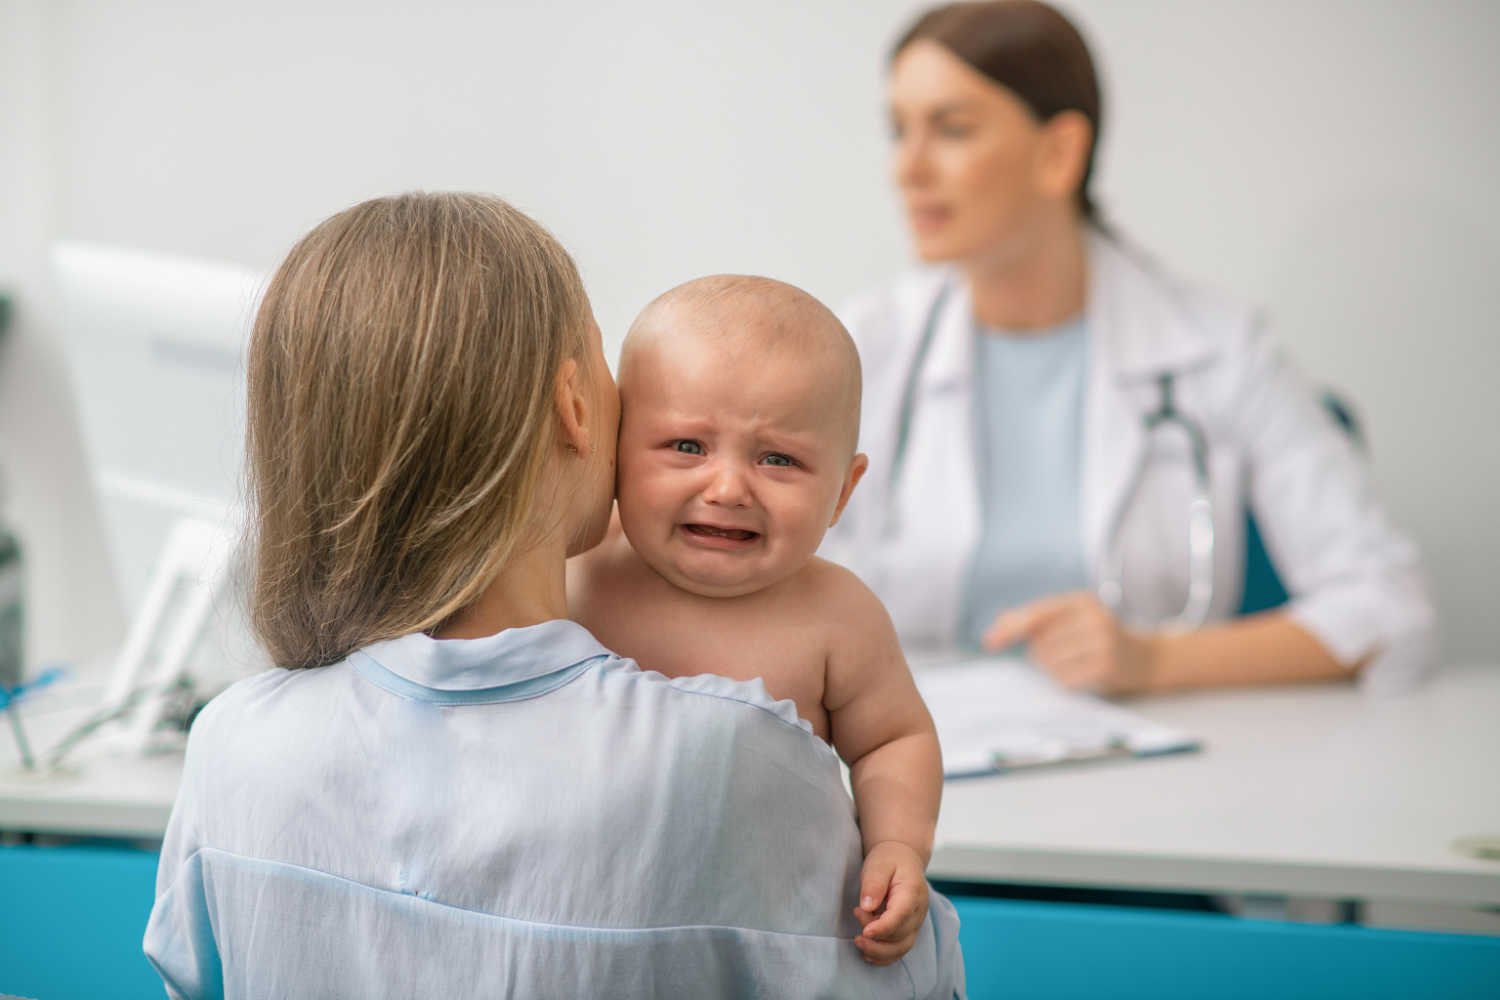 Challenges Parents Face When Taking Baby For Doctor's Visits